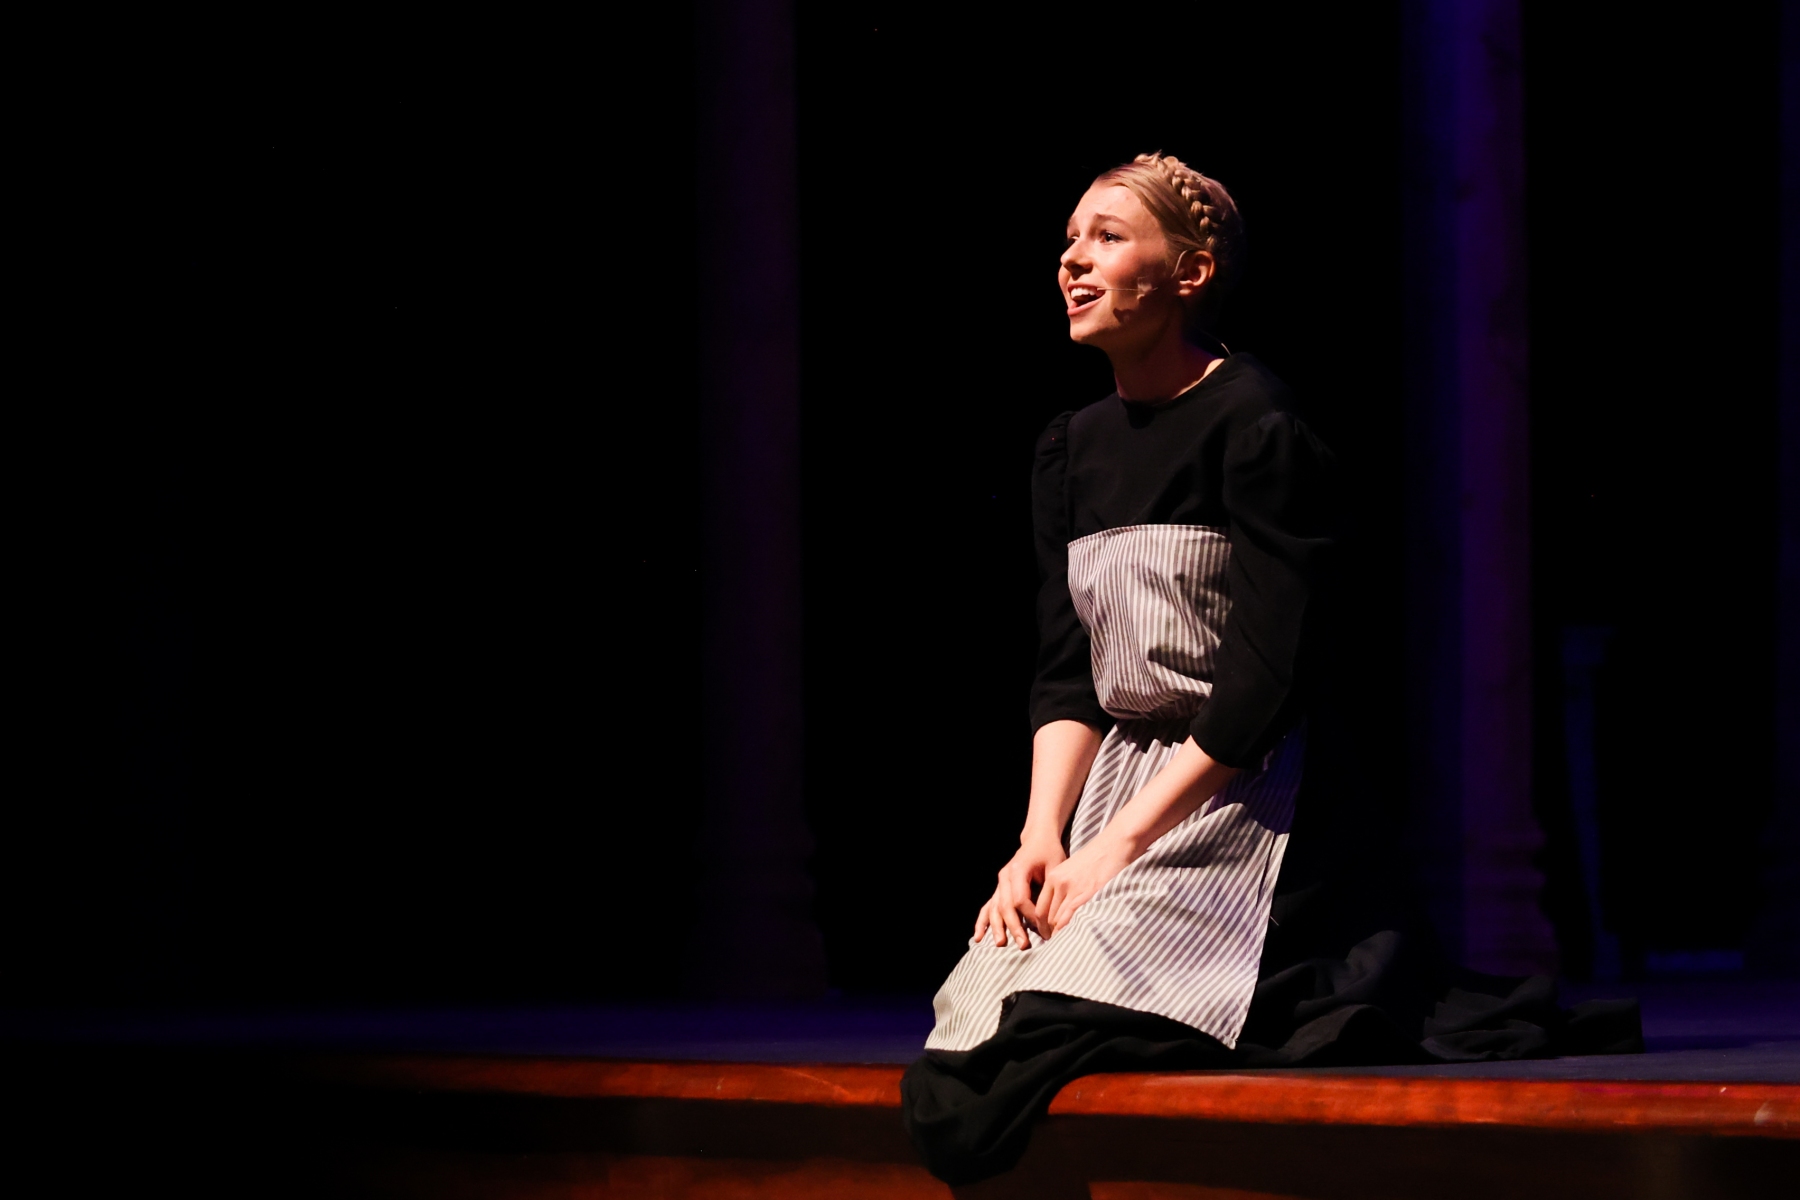 Sydnee Glover, whitworth student, as main character, Maria Rainer, sits front stage at the dress rehearsal of "Sound of Music", Thursday, Oct. 13, 2022, in Spokane, Wash. | Mario Gonzalez/The Whitworthian